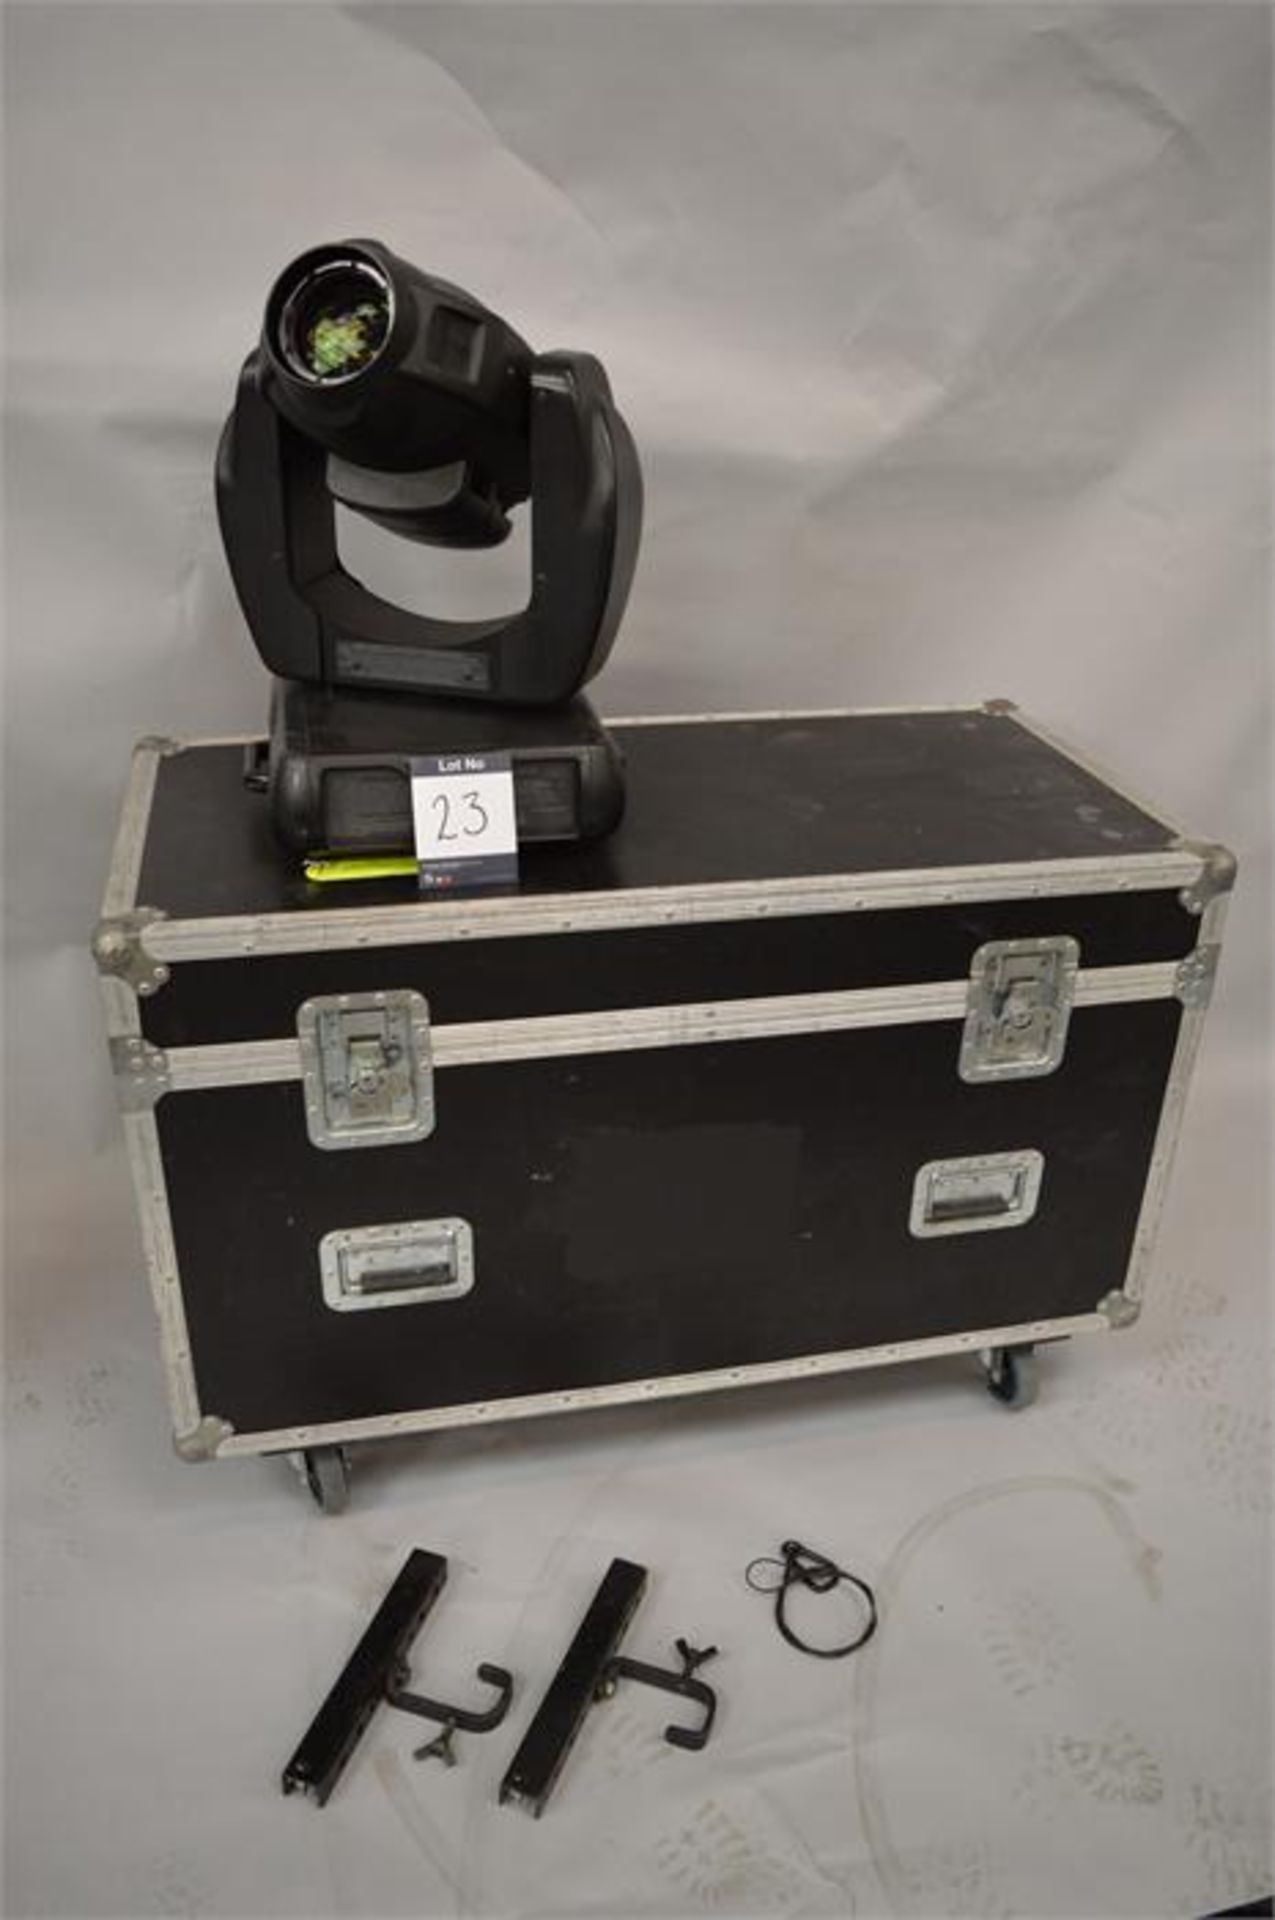 1 x Varilite, VL2000 Moving Head Spot Light with Flightcase and assoiated Brackets, as lotted (maybe - Image 4 of 4